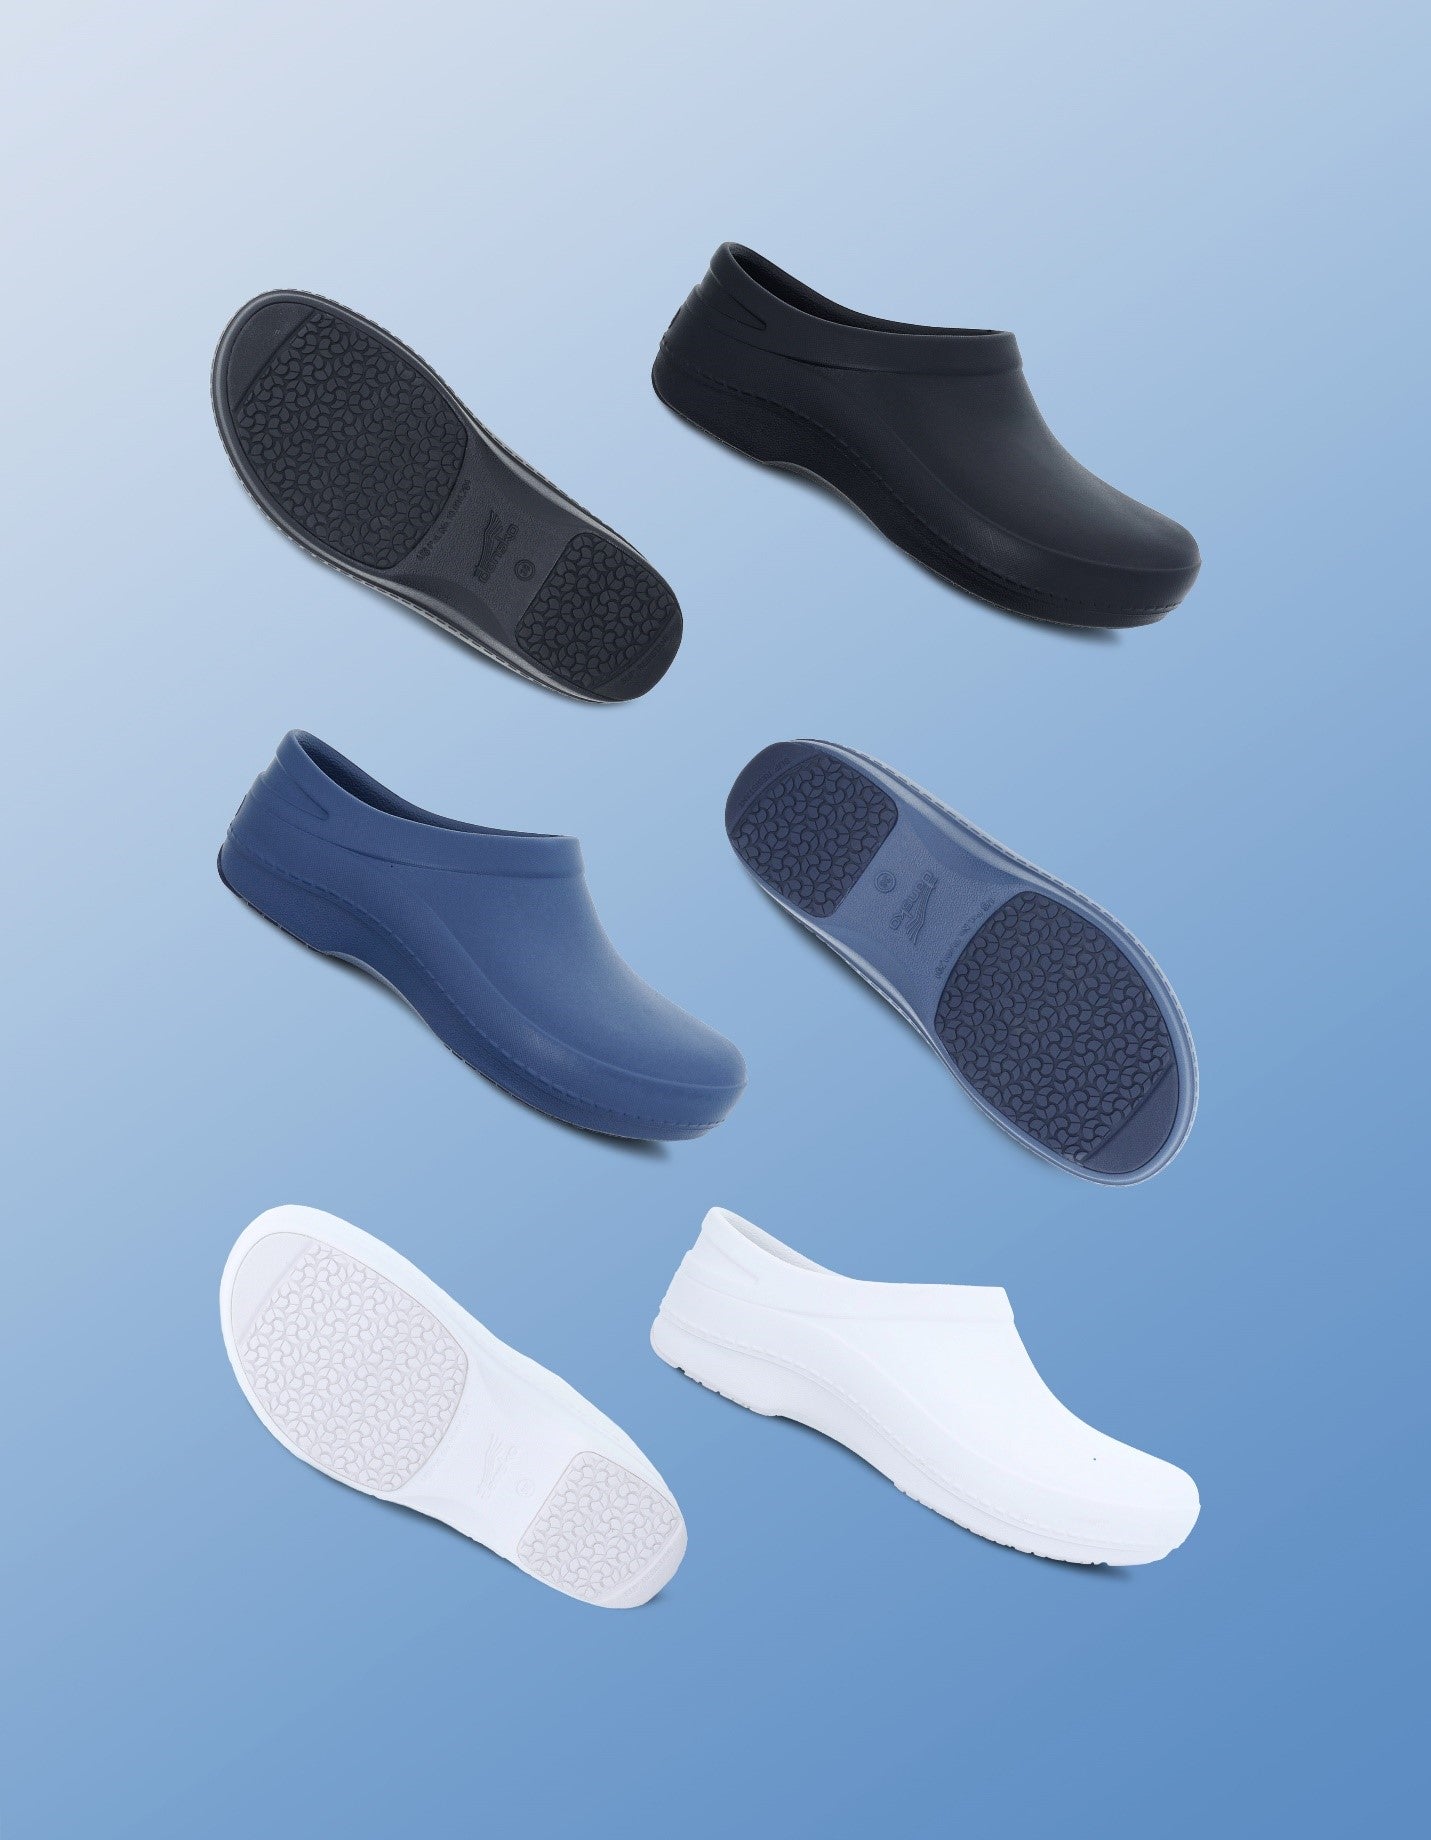 Black, blue, and white molded clogs showing slip-resistant rubber outsoles.